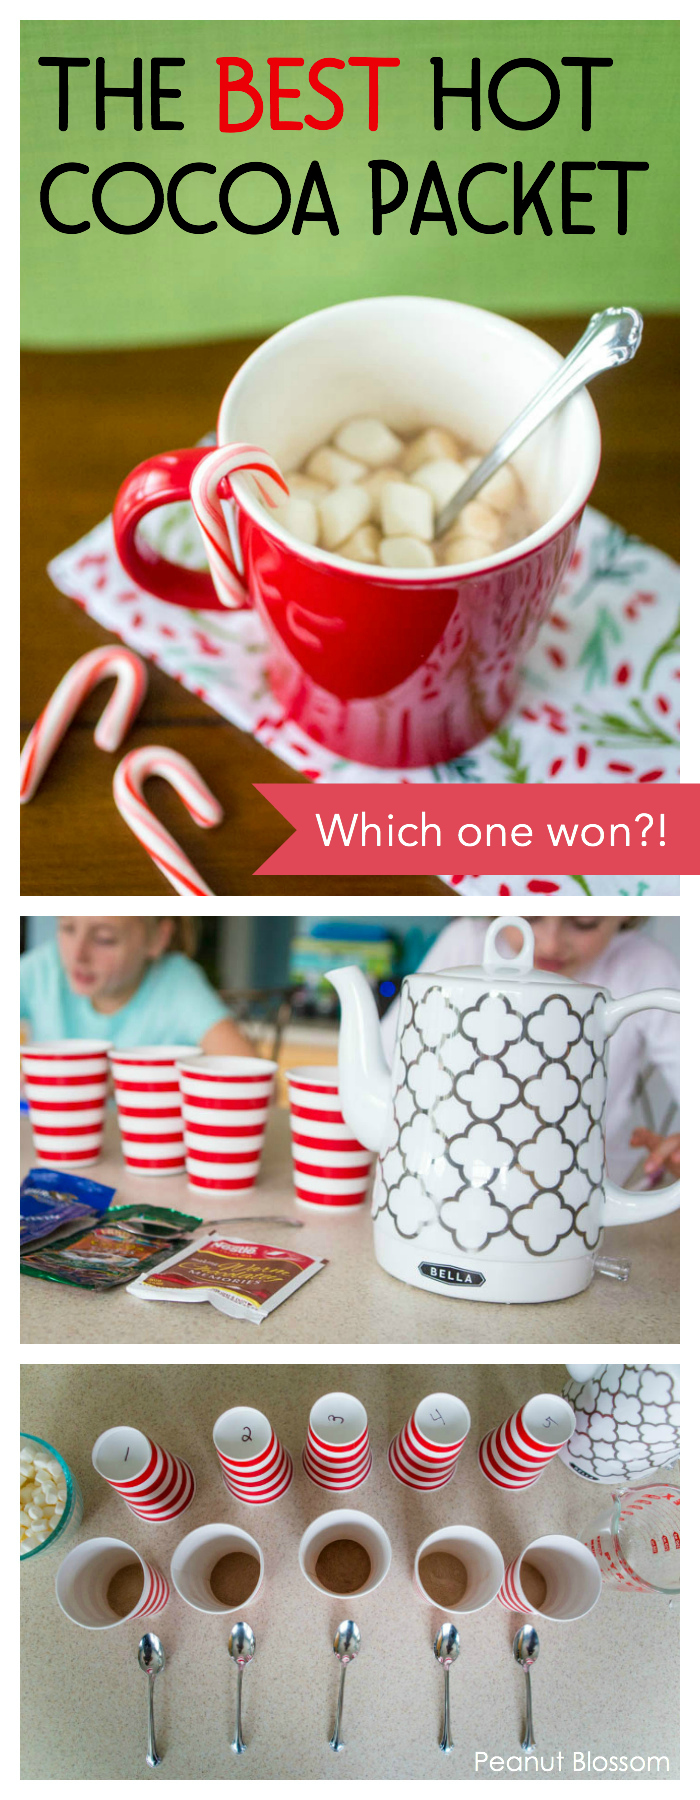 The best hot cocoa packets taste test challenge: Which one is worthy of keeping in your pantry this winter?